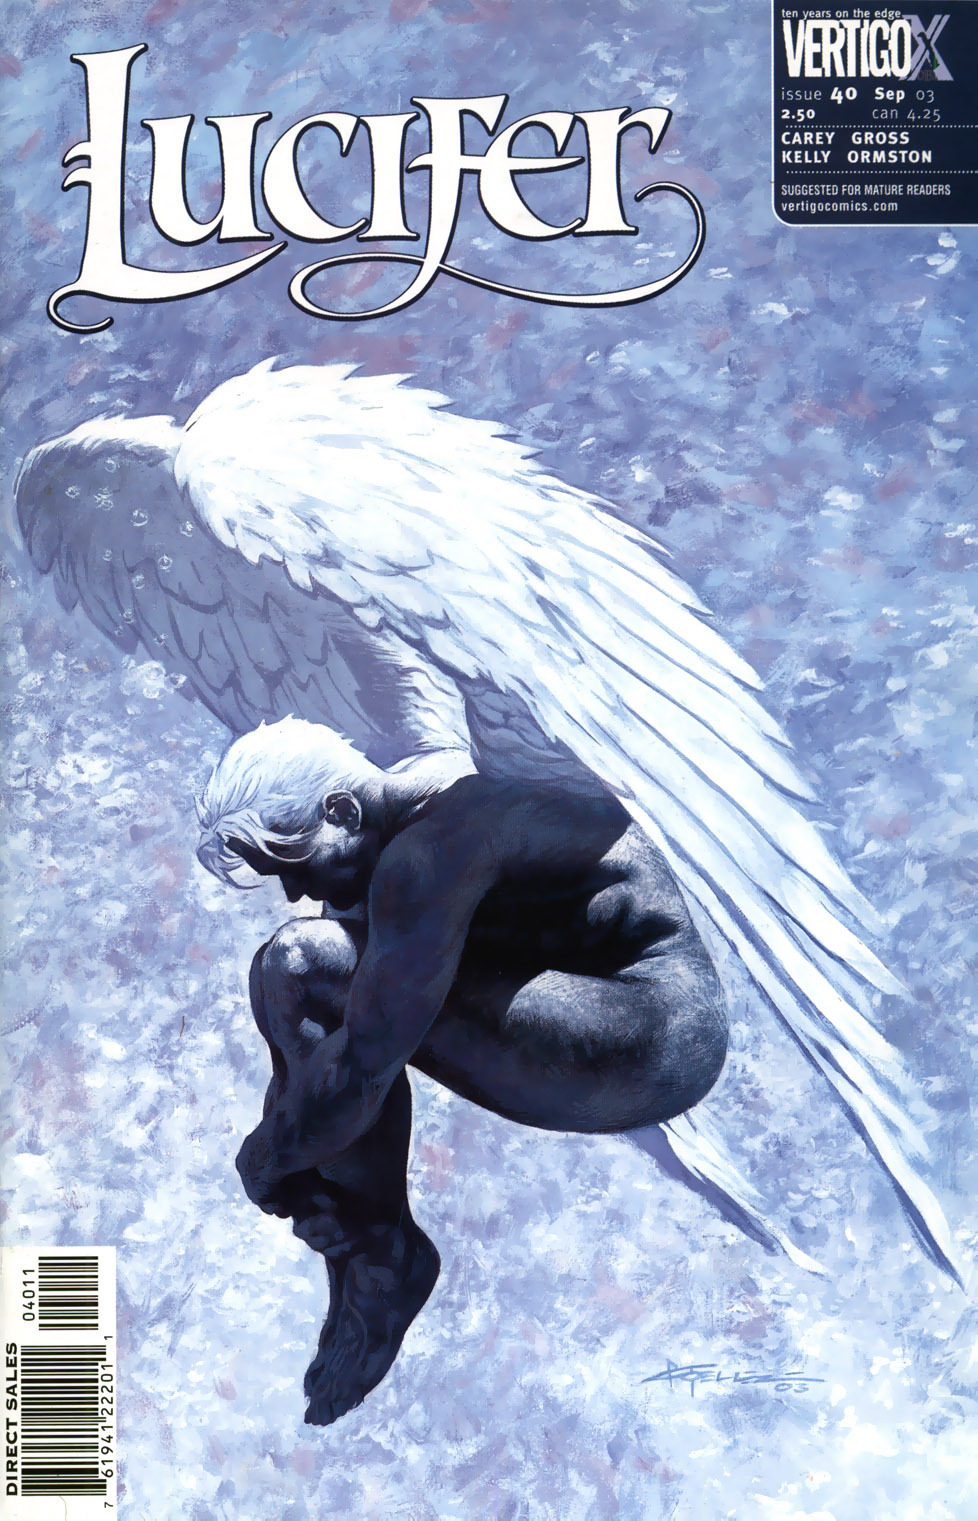 comicbookcovers:  Lucifer #40, September 2003, cover by Christopher Moeller